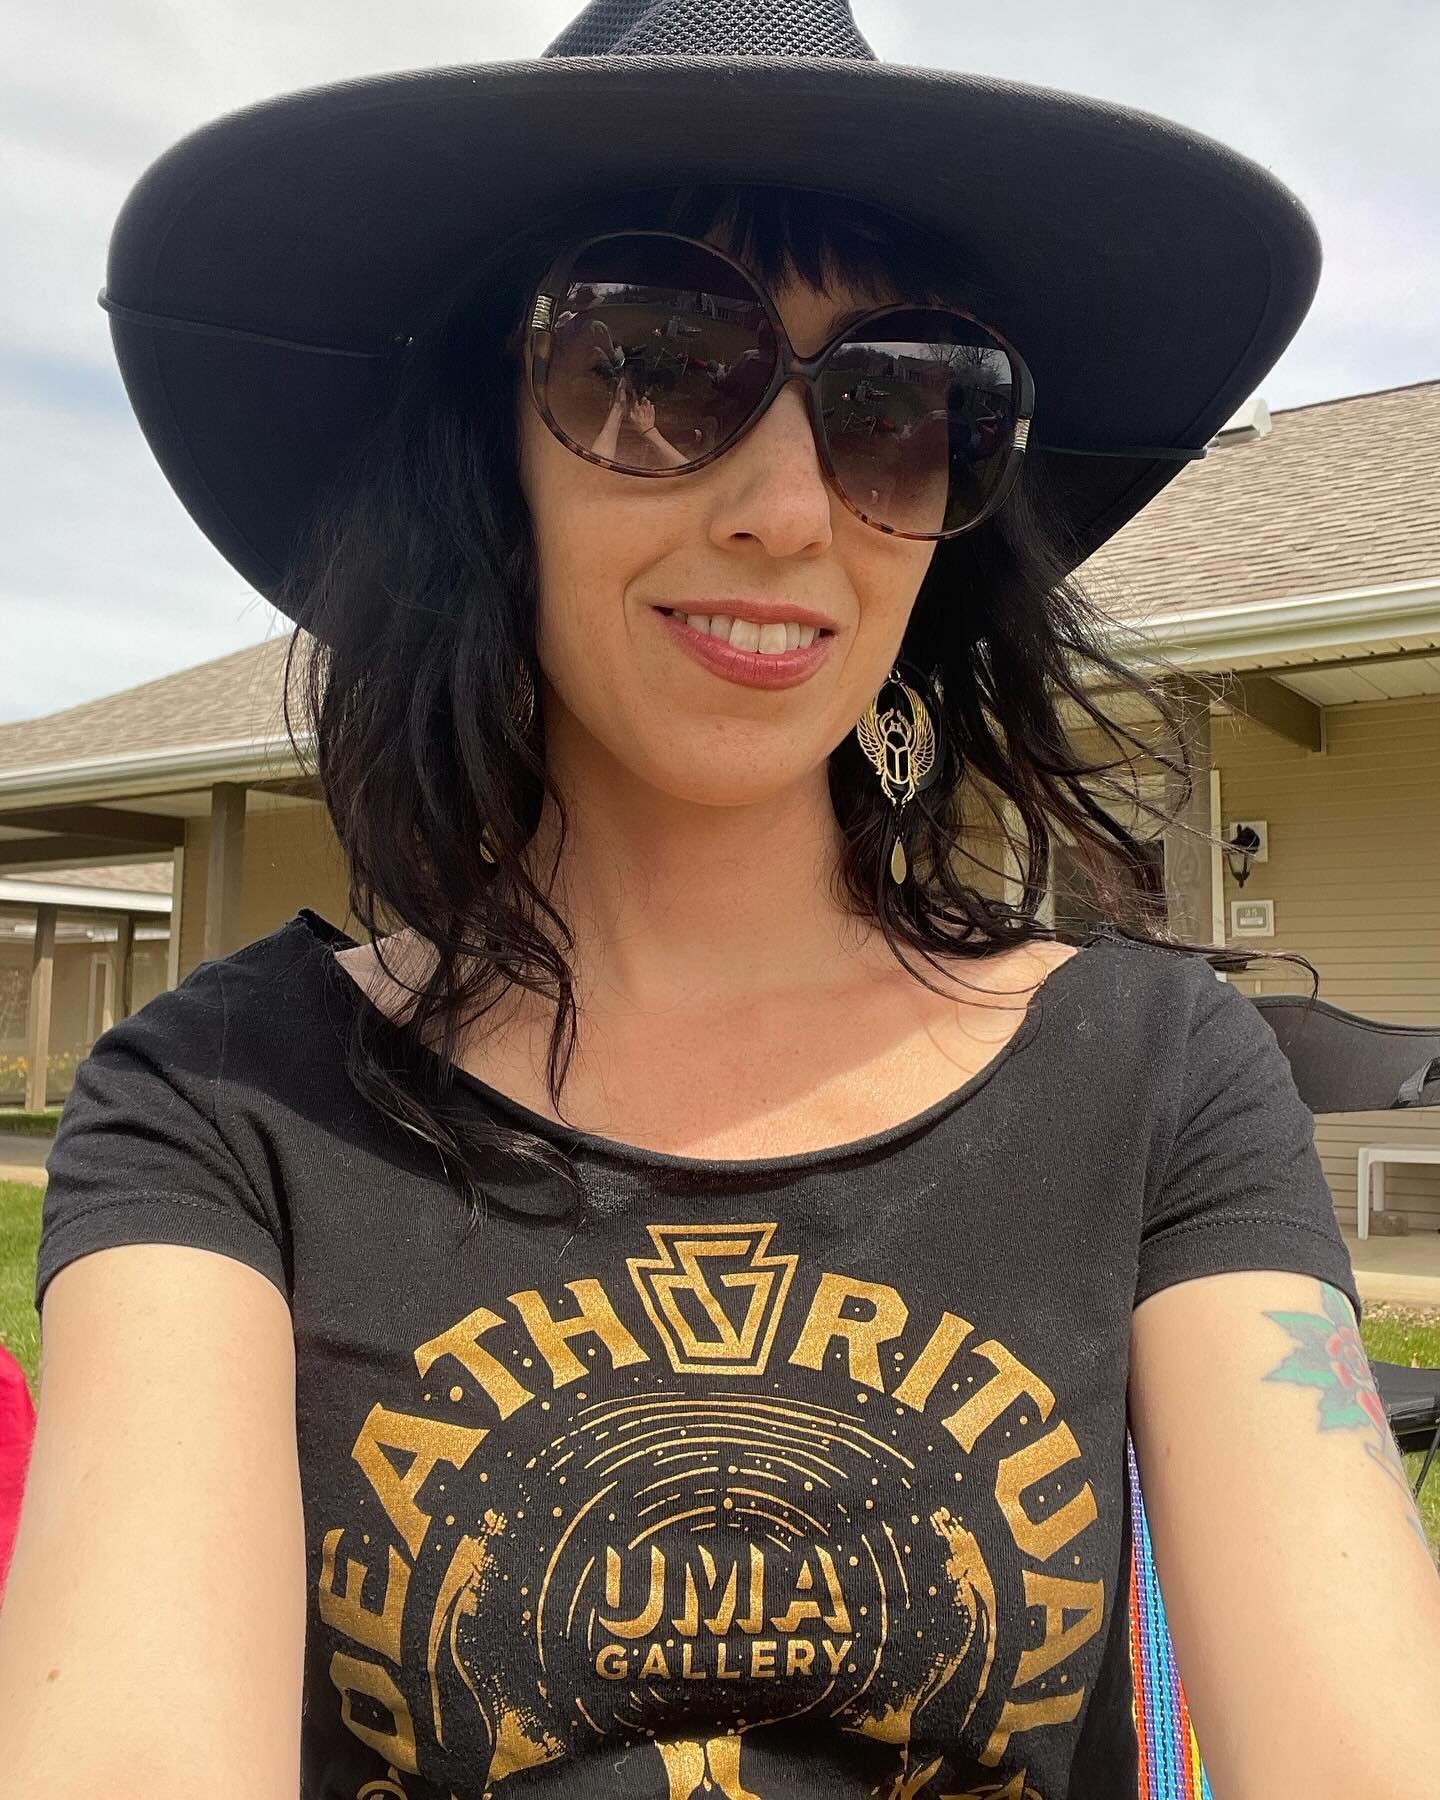 Happy eeeklipse 🌝 The ancient Mayans used obsidian to watch the eclipse but I&rsquo;m not sure if that&rsquo;s ISO approved so I used regular ol glasses.

Death Ritual shirt from @umagalleryoakland and scarab earrings by me symbolizing death and reb